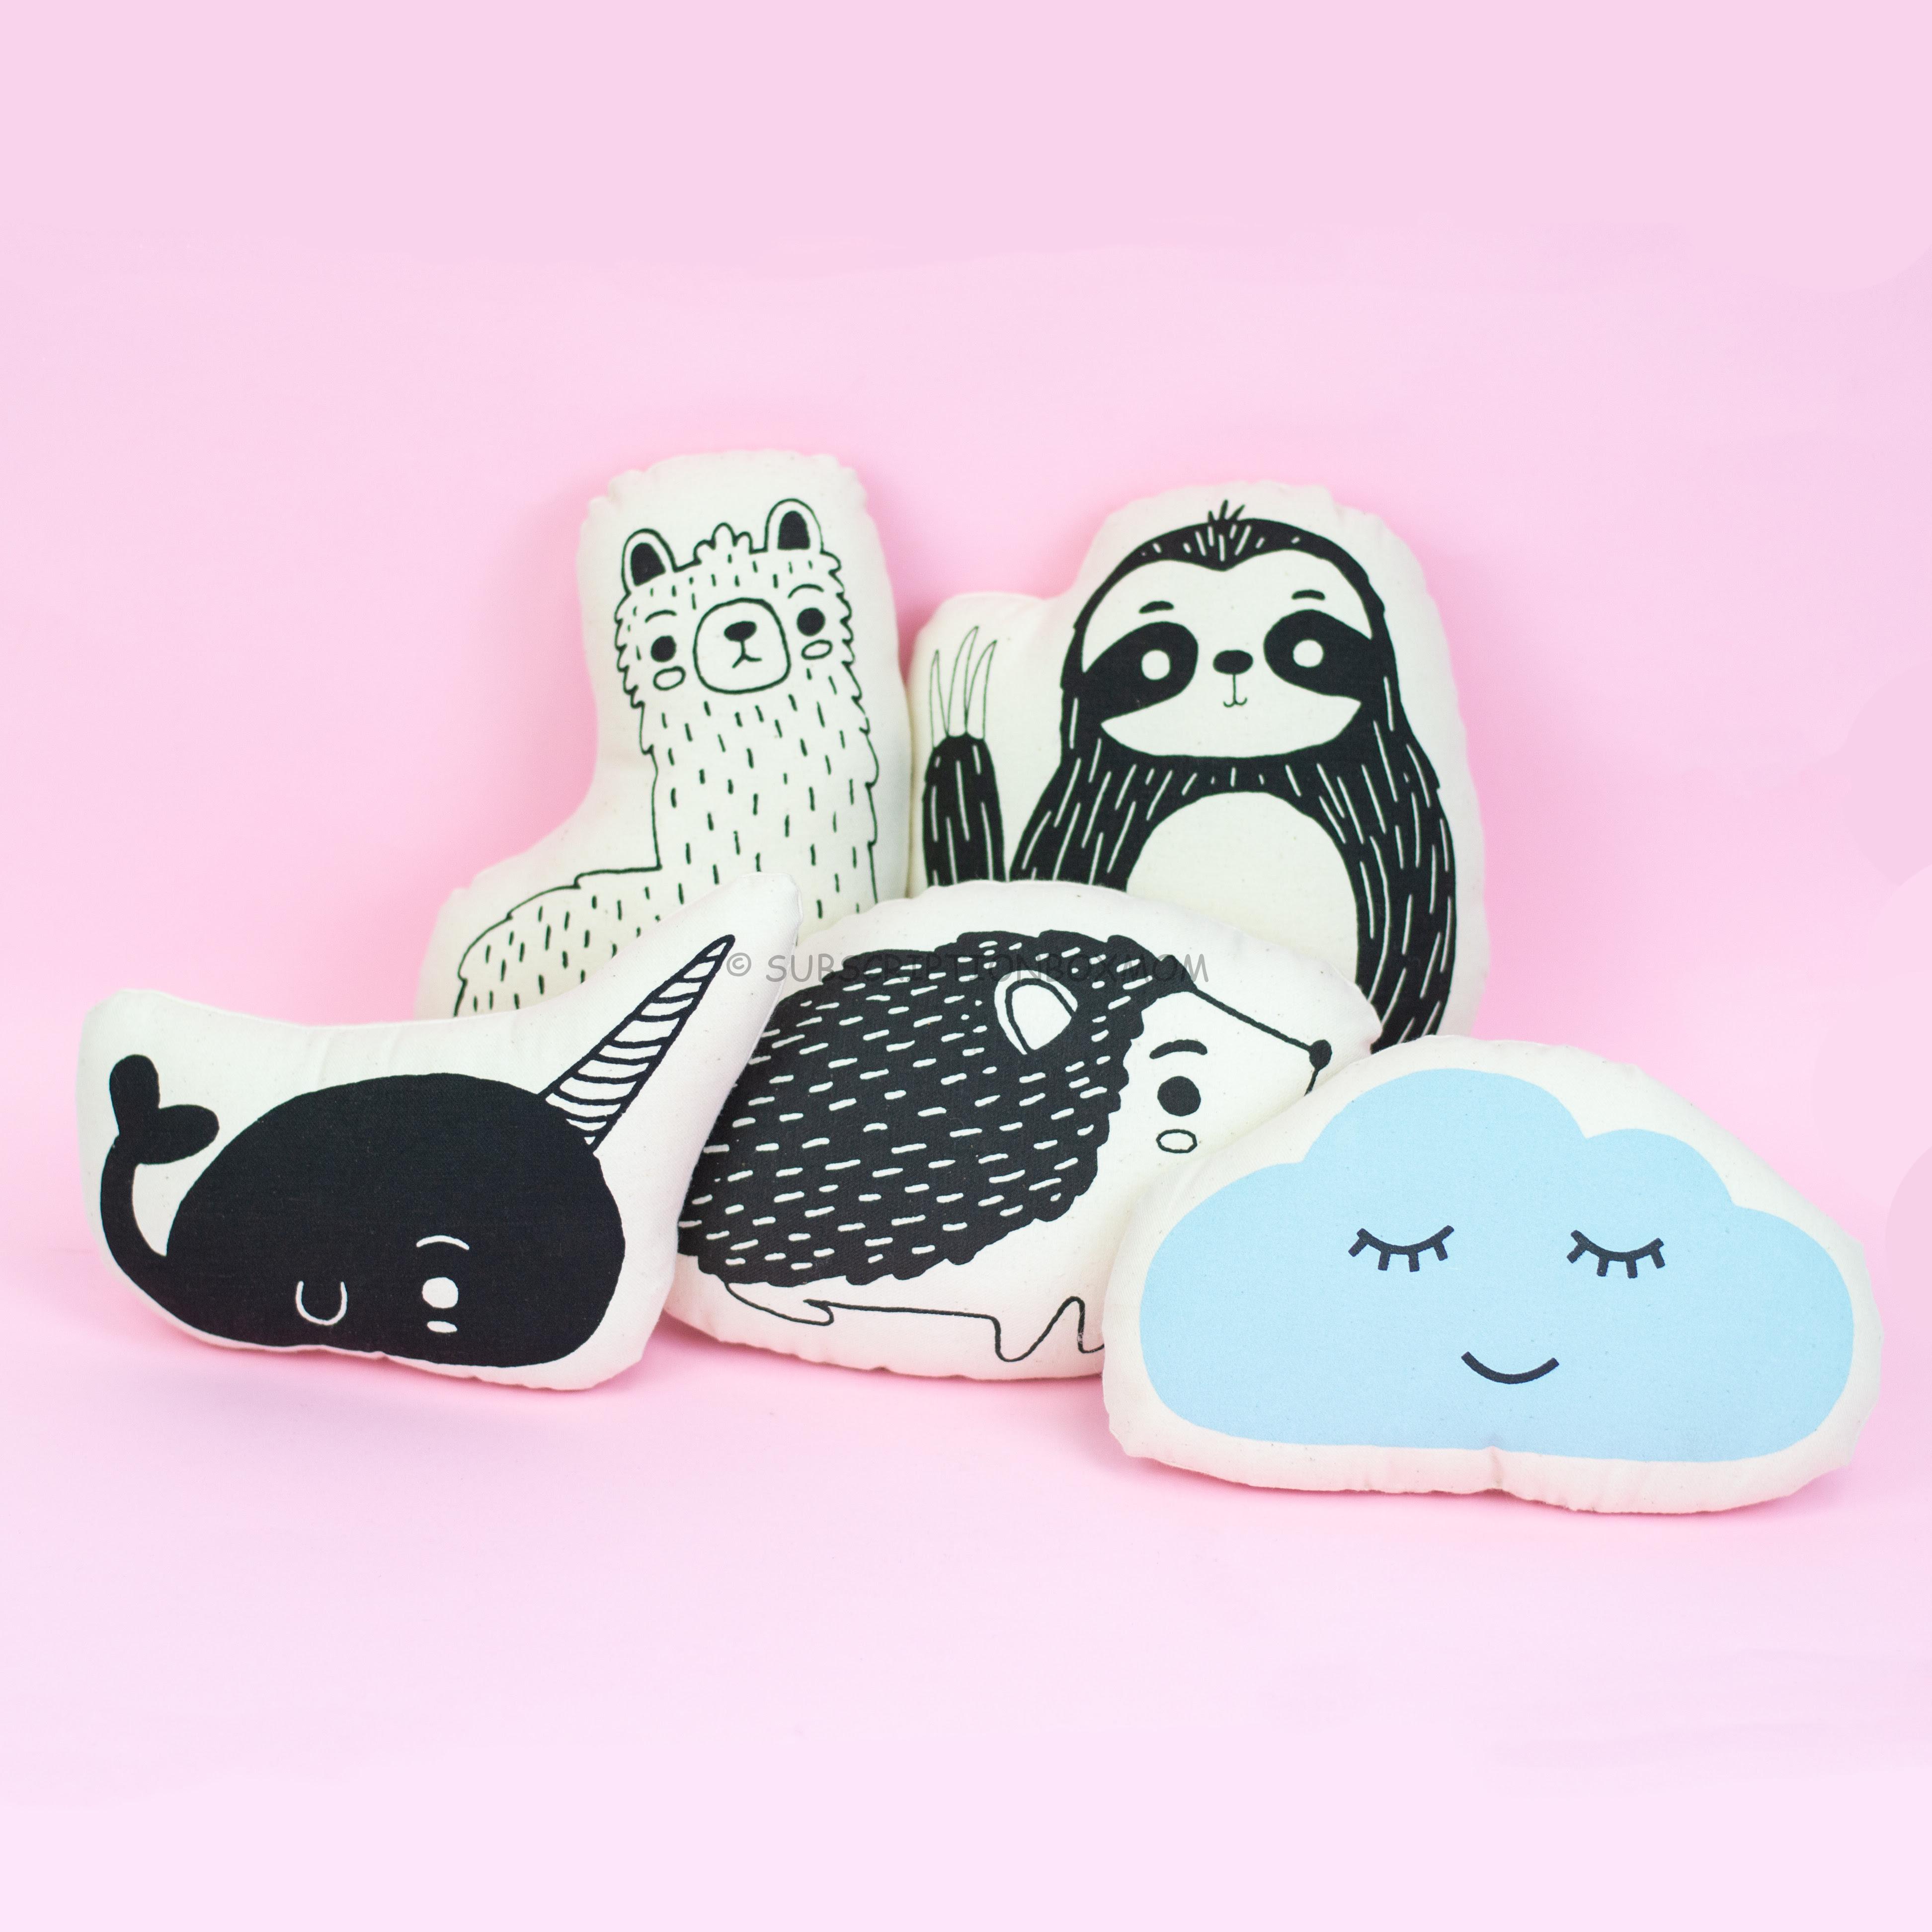 Assorted Animal Pillow - Surprise Me!  